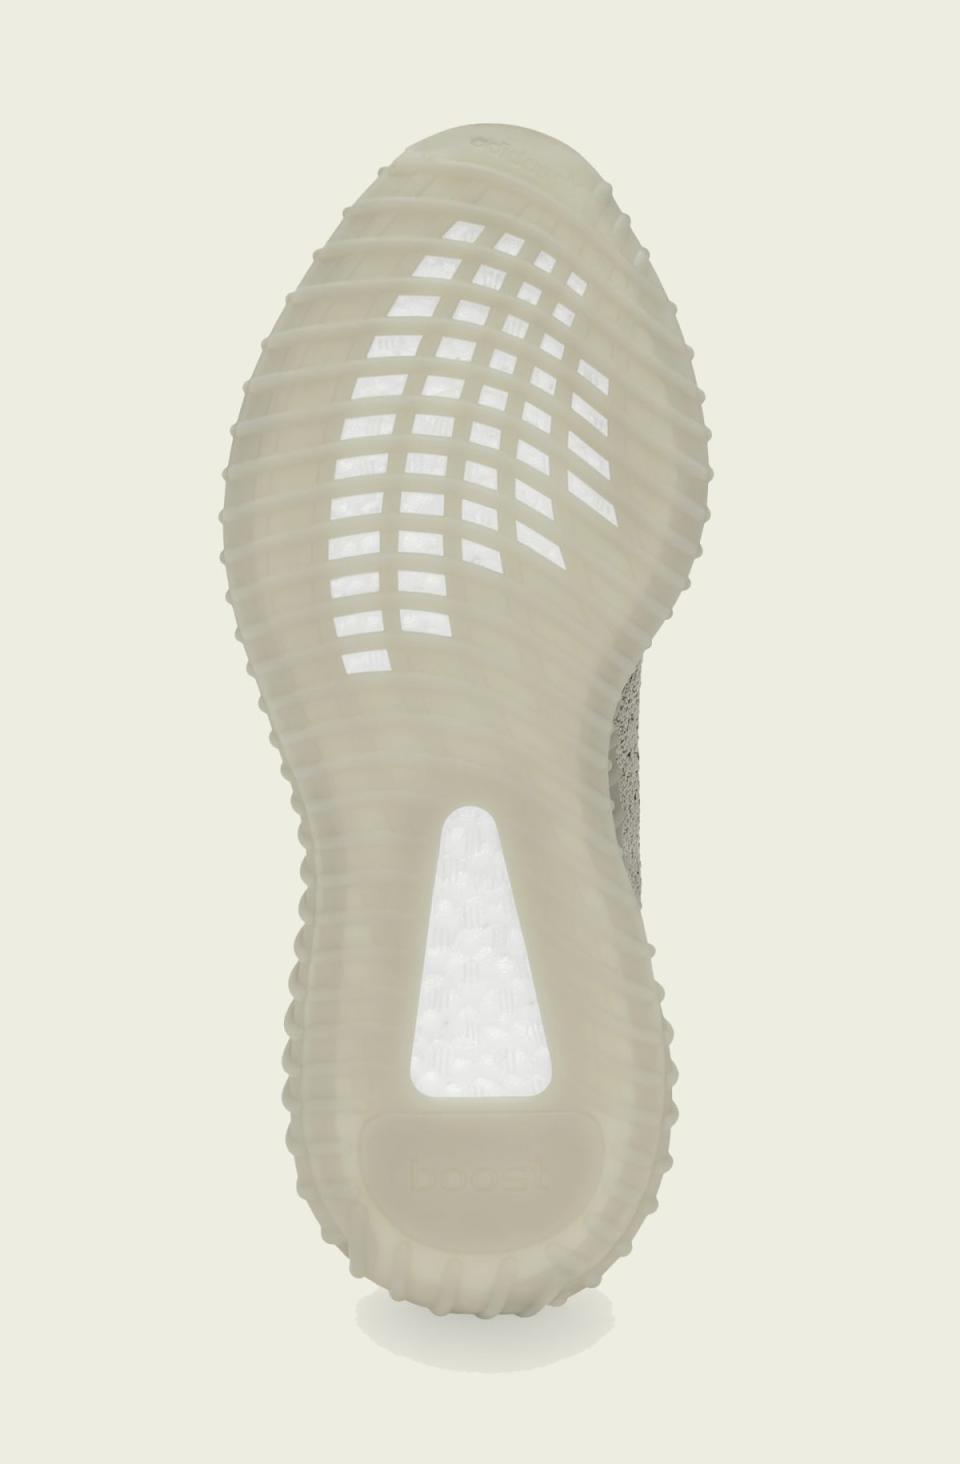 The outsole of the Adidas Yeezy Boost 350 V2 “Slate.” - Credit: Courtesy of Adidas